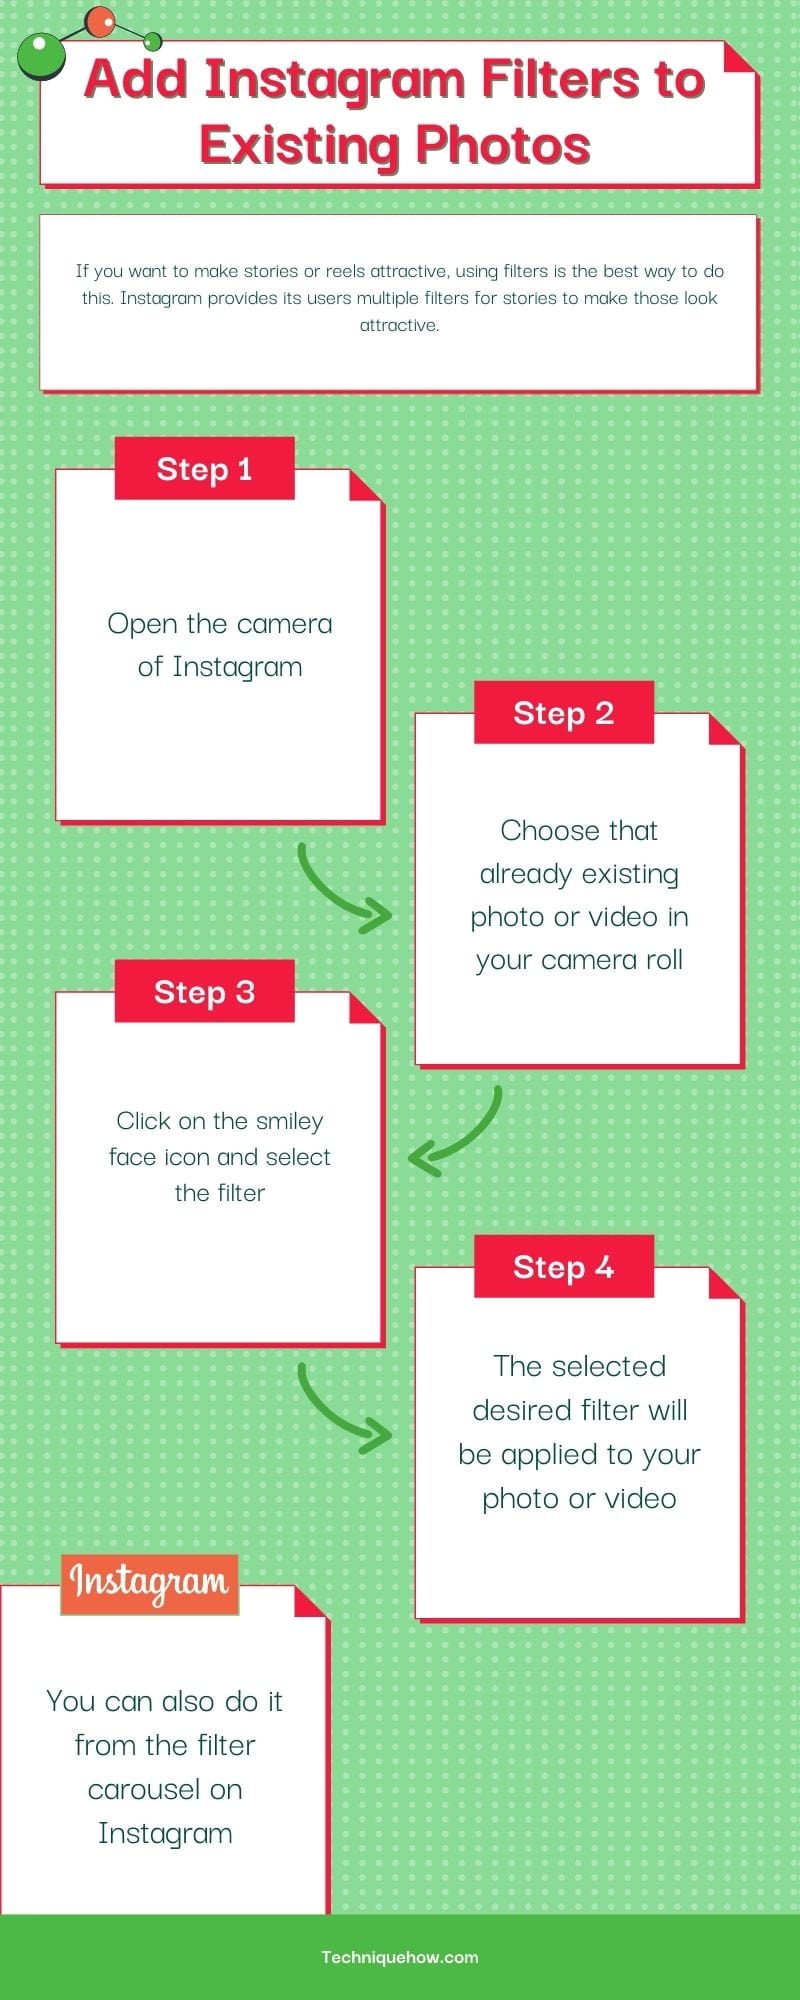 infographic_Add Instagram Filters Existing Photos Videos